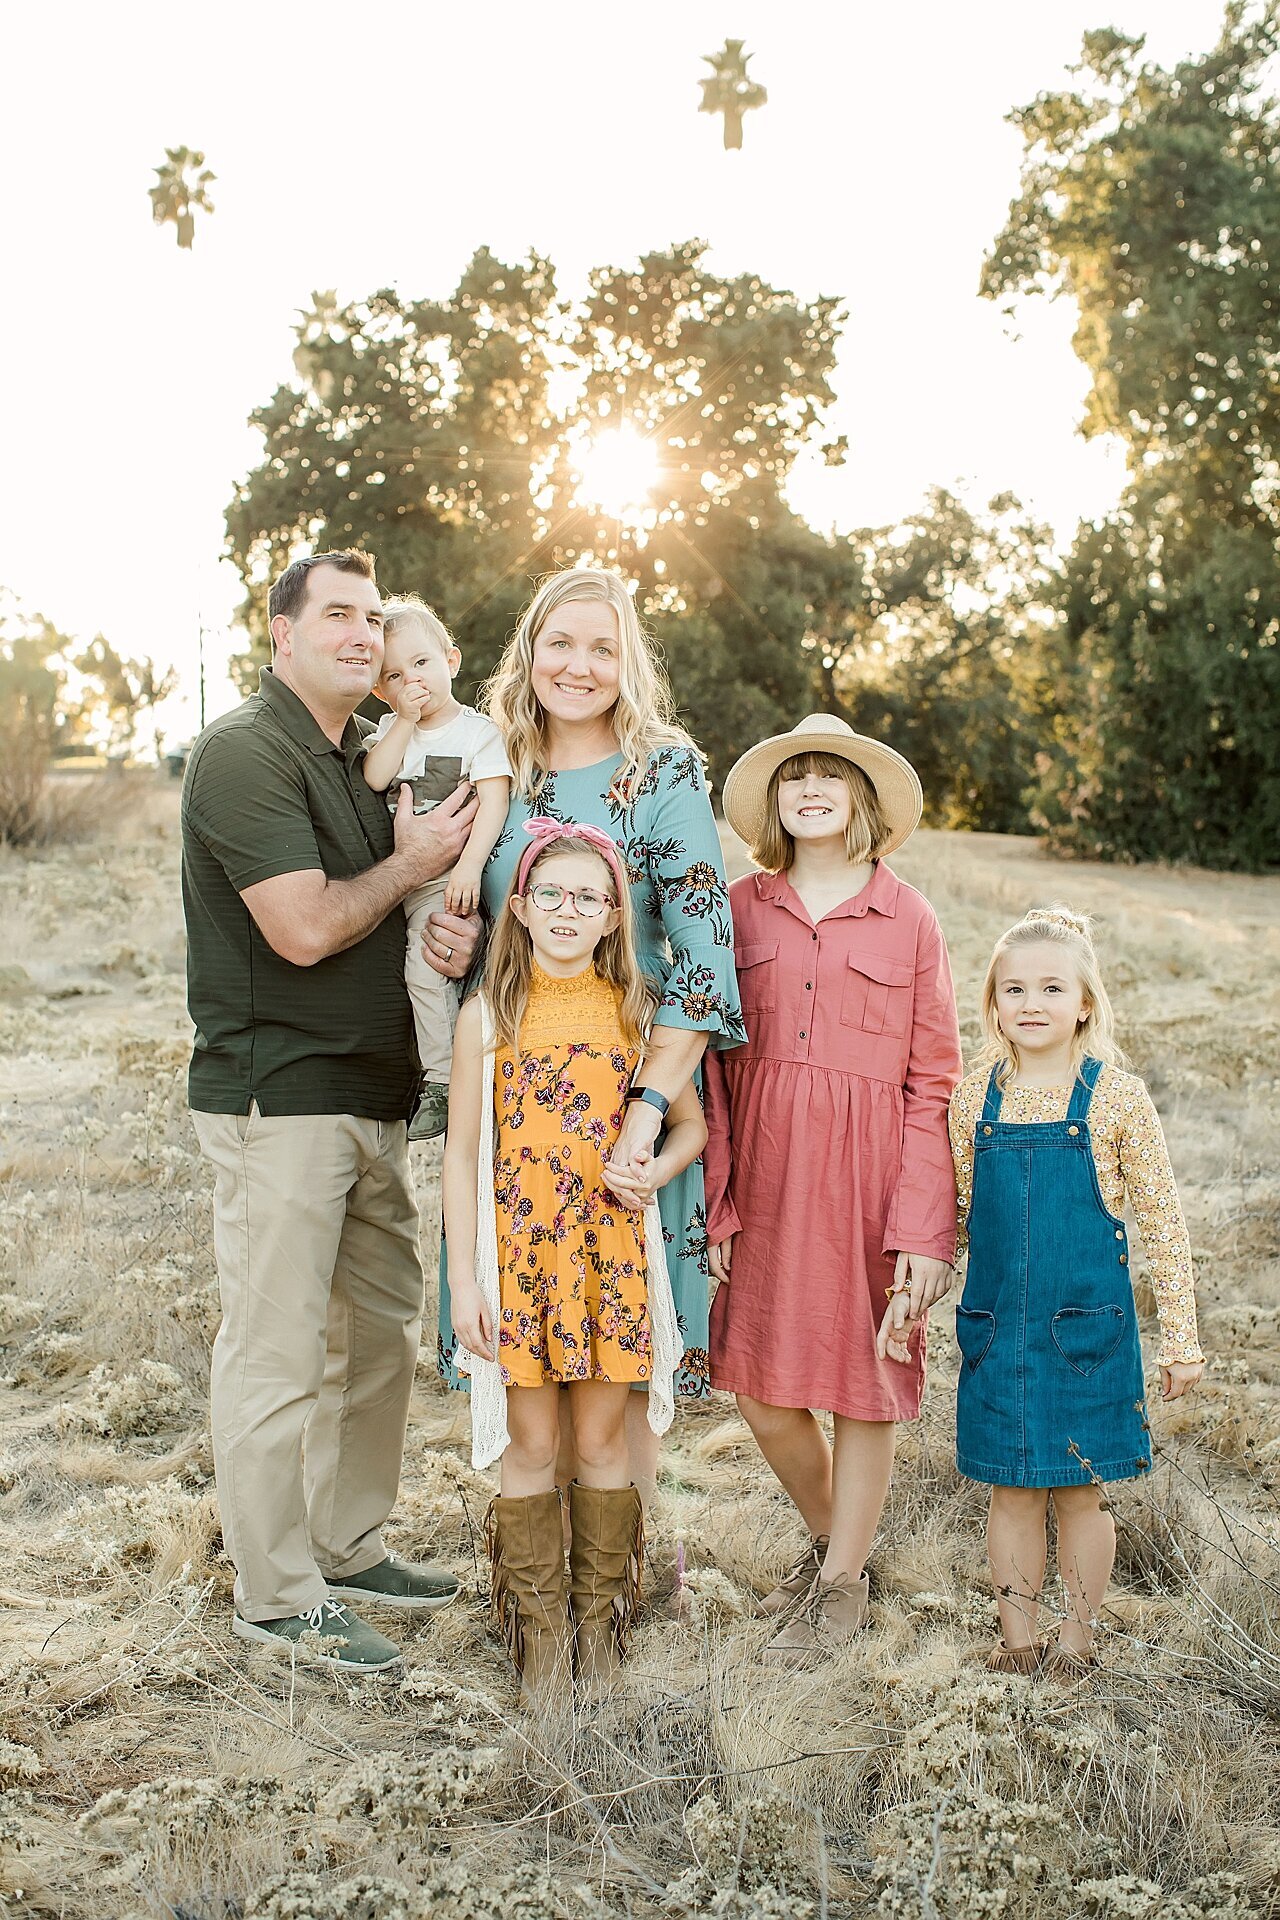 MIchelle Peterson Photography Redlands California wedding and portrait photographer_1169